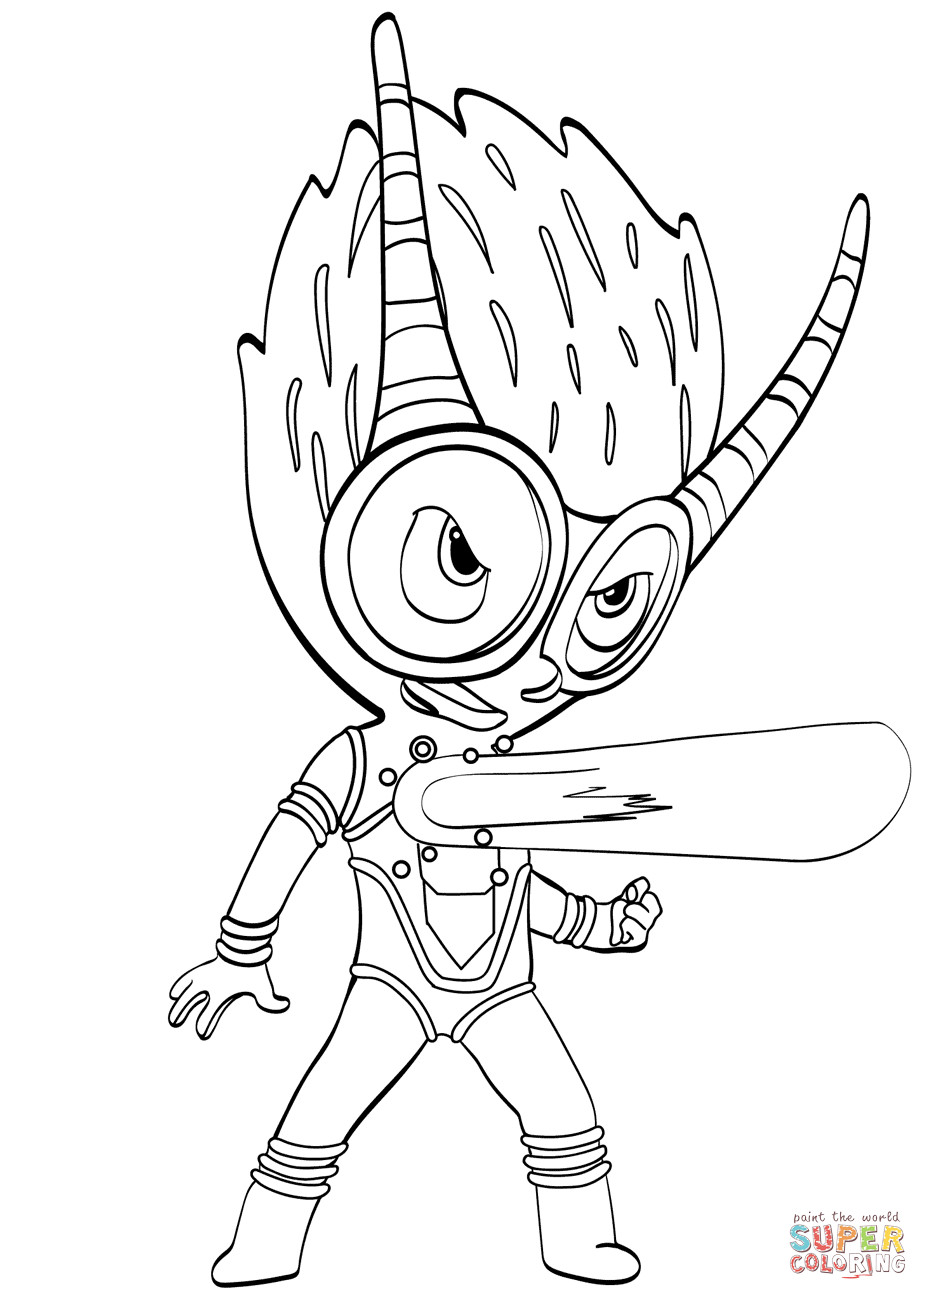 Pj Masks Coloring Pages Printable
 Firefly Villain from PJ Masks coloring page